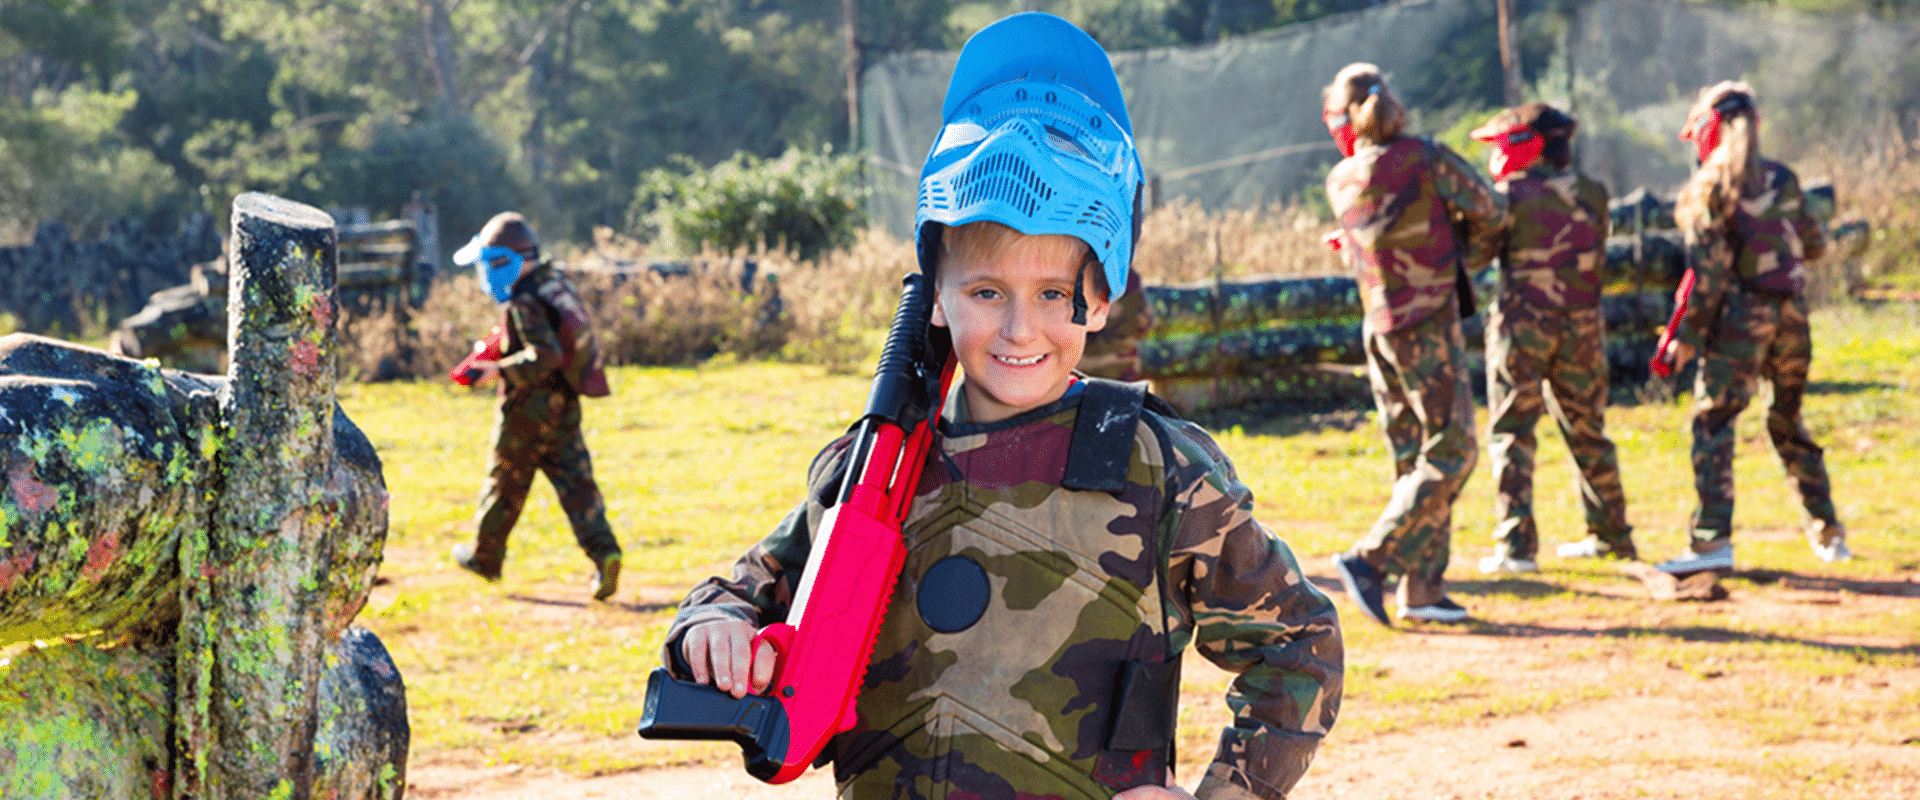 Splatmaster Reading Low Velocity Paintballing for Kids age 8 years upwards.